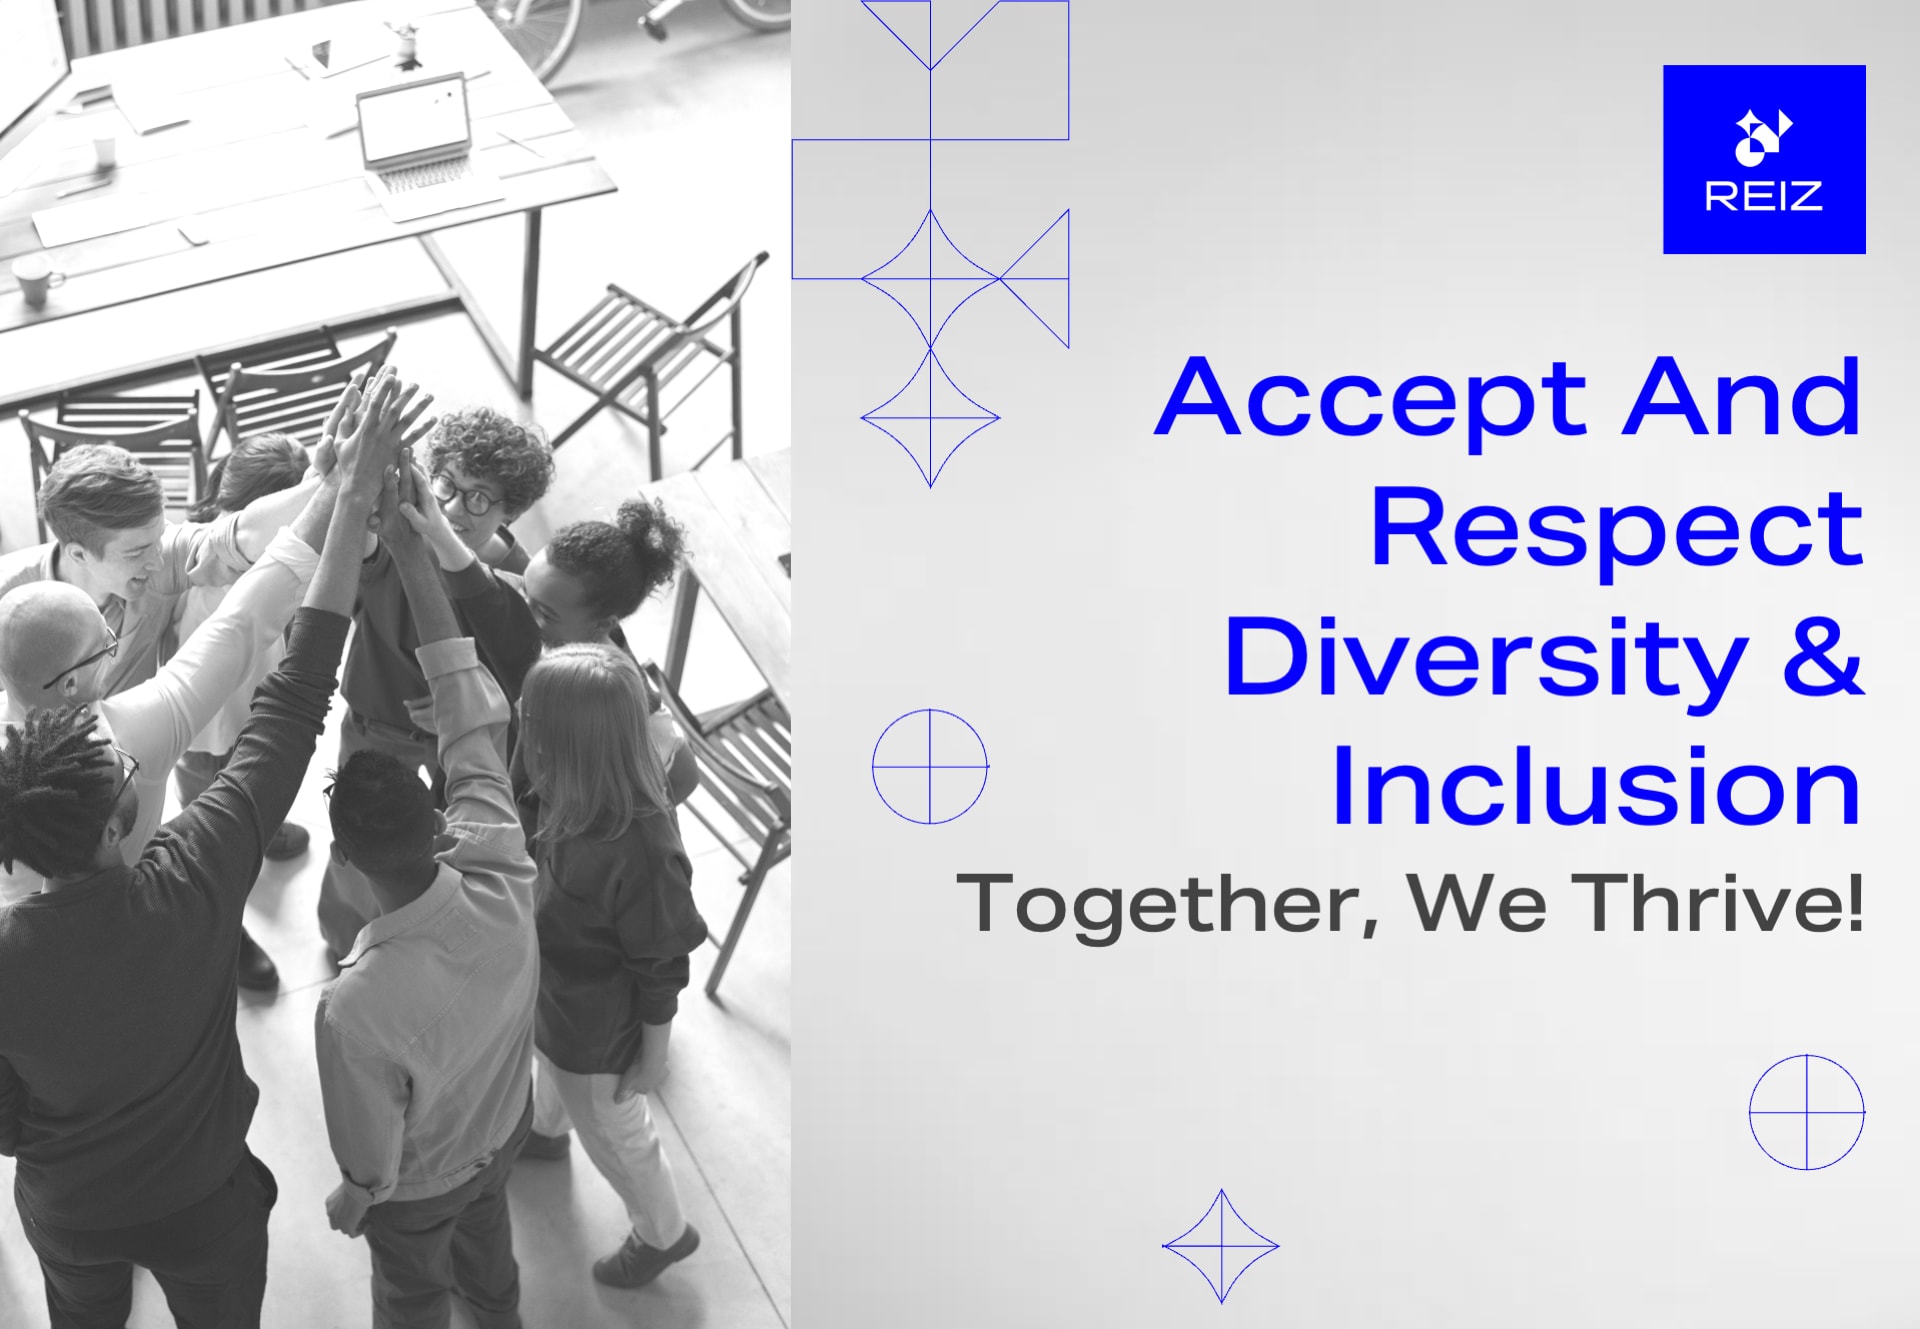 Accept and Respect Diversity & Inclusion